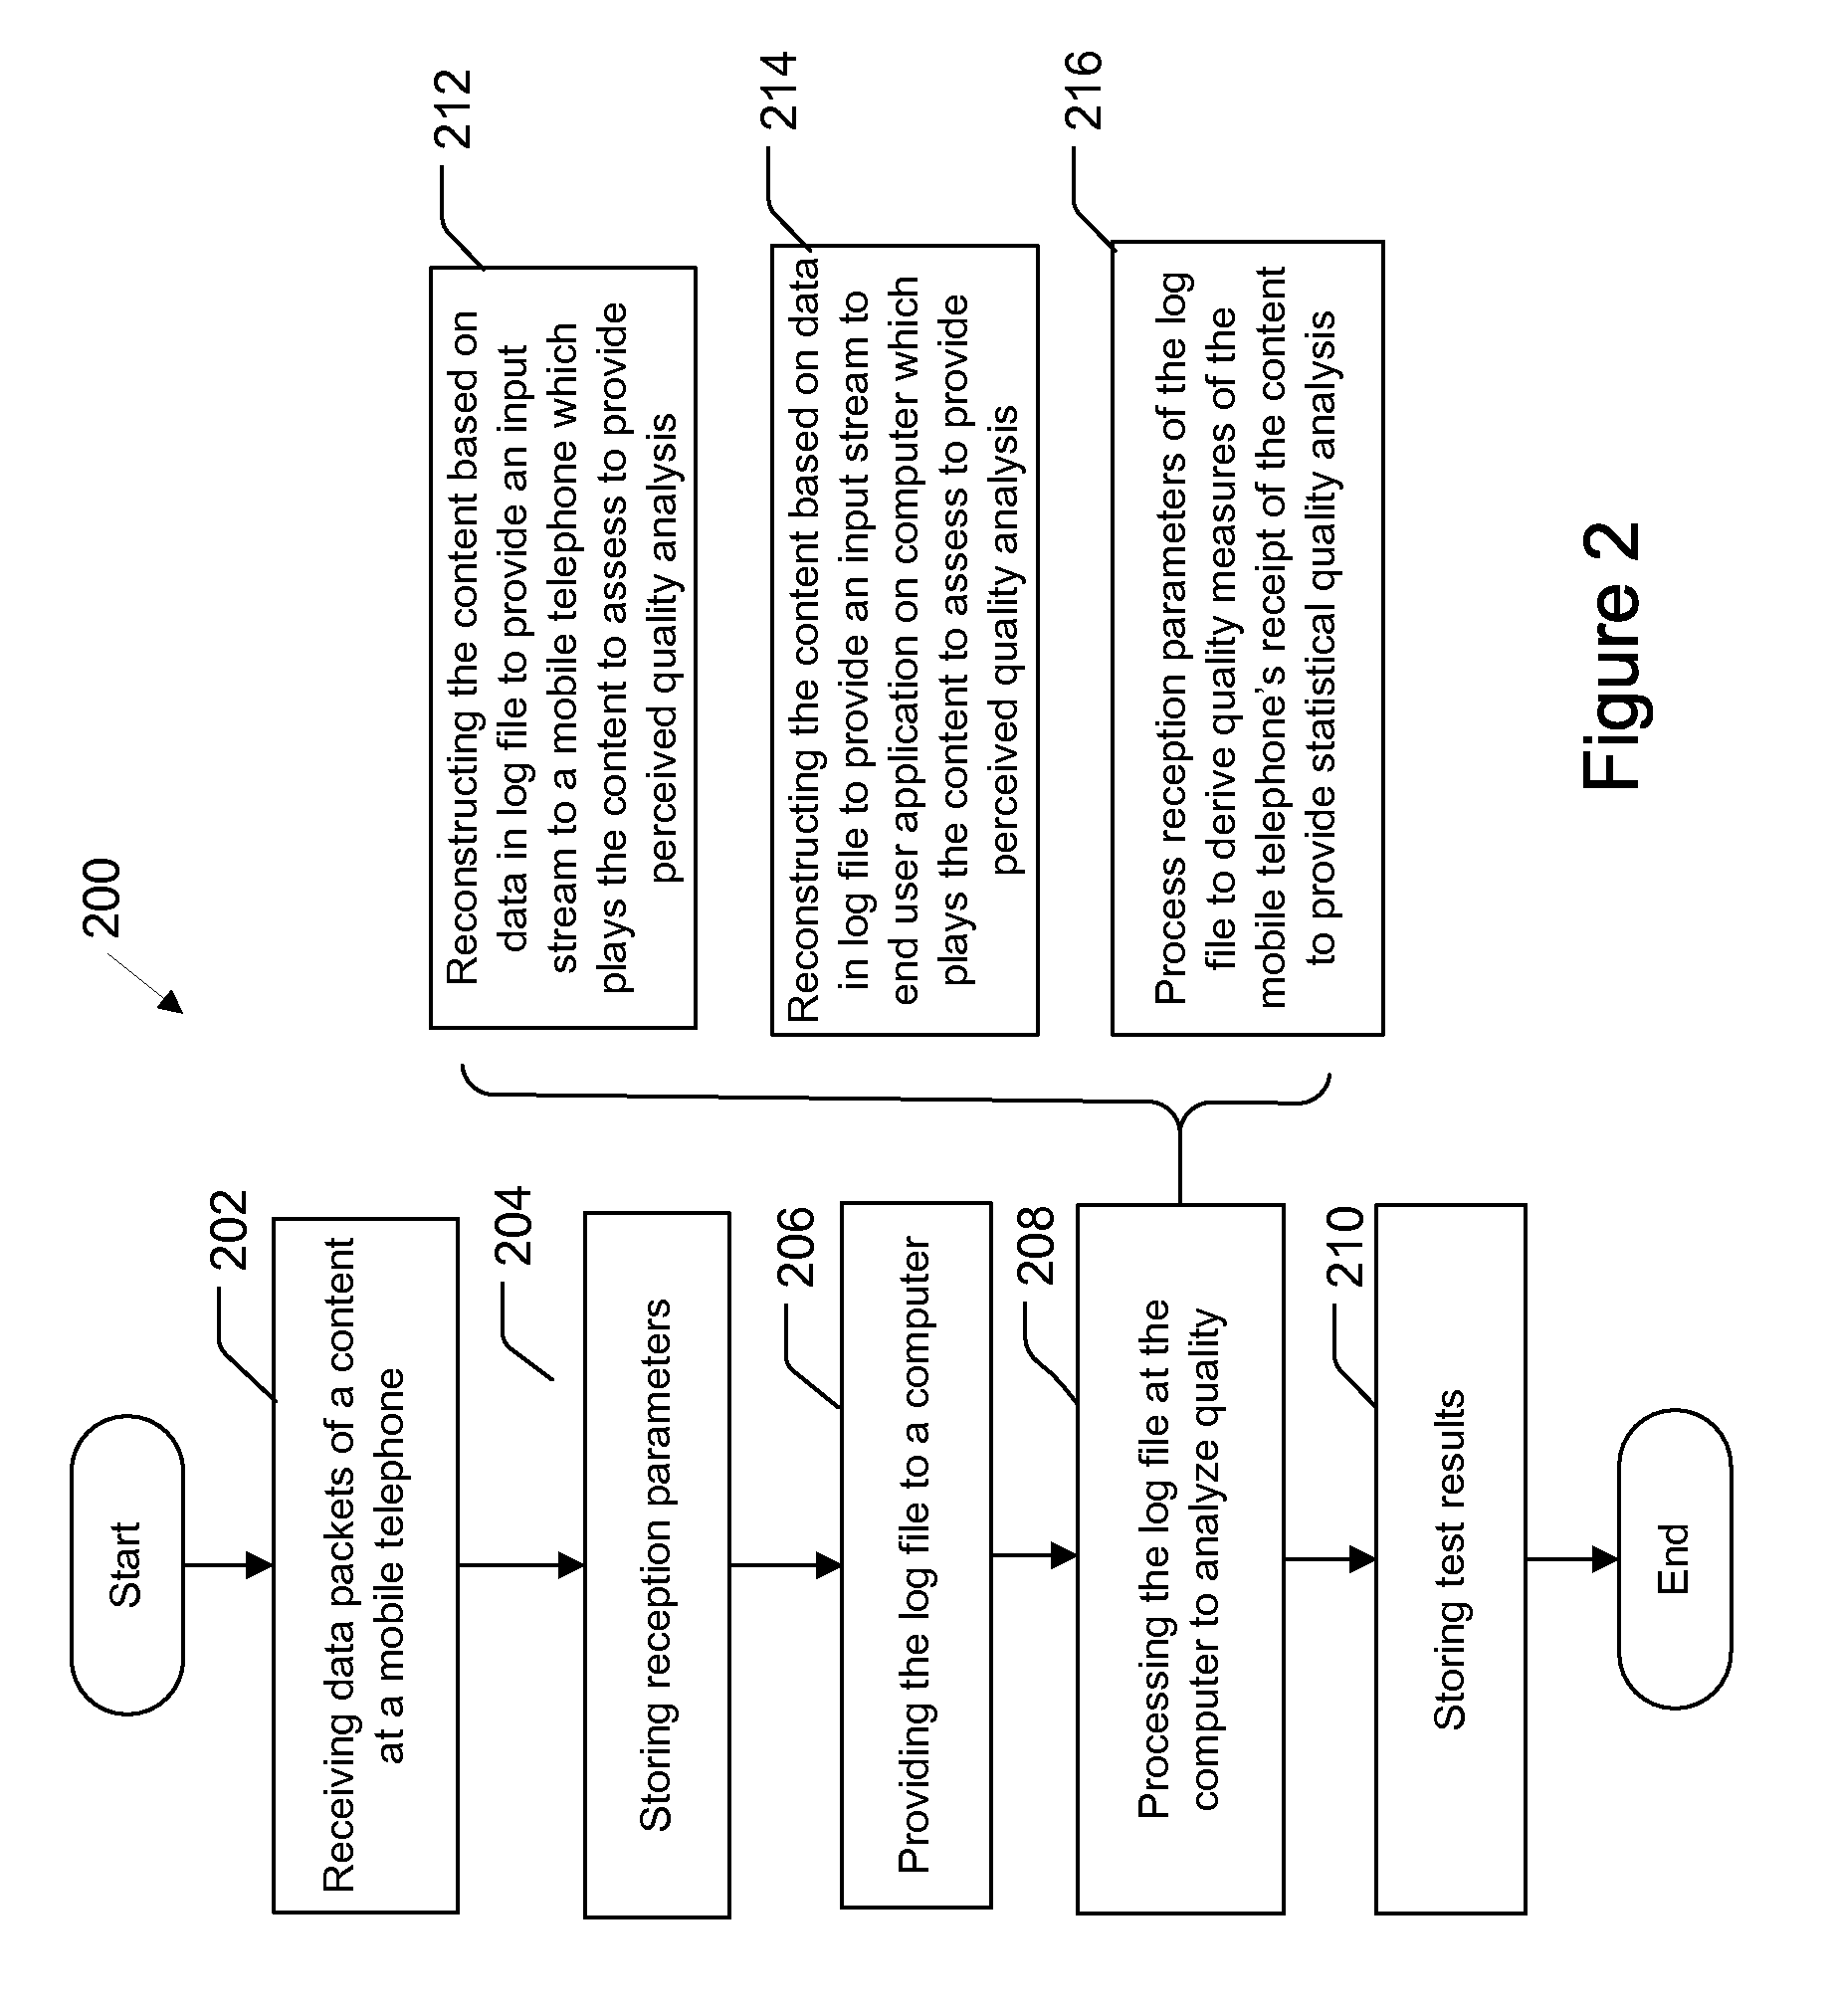 System and Method for Testing Mobile Telephone Data Services